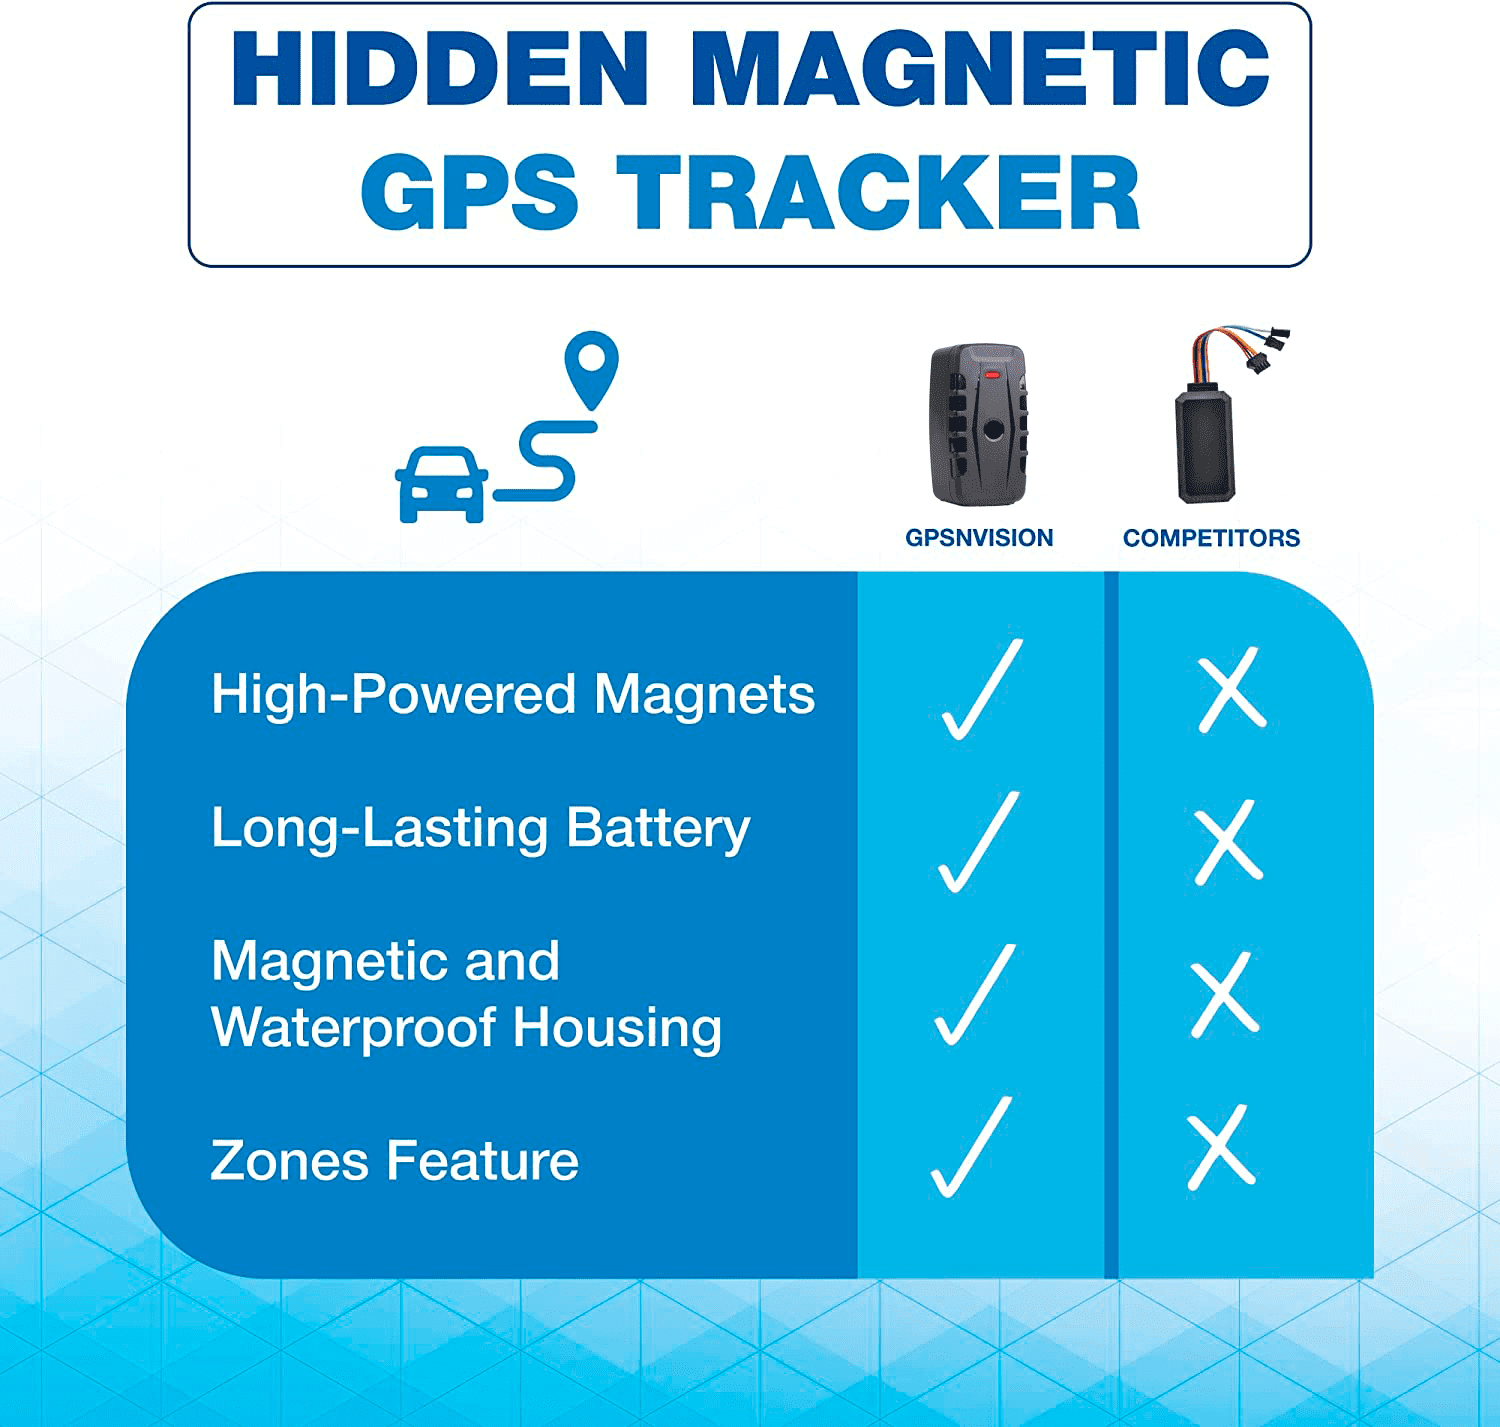 Hidden Magnetic Portable Ready-to-Use GPS Tracker for Vehicles, Real-Time  LTE Car Tracker Device, Waterproof GPS Tracker, Tracking Devices with Theft  Alert and 2 Month Long Battery Life. 